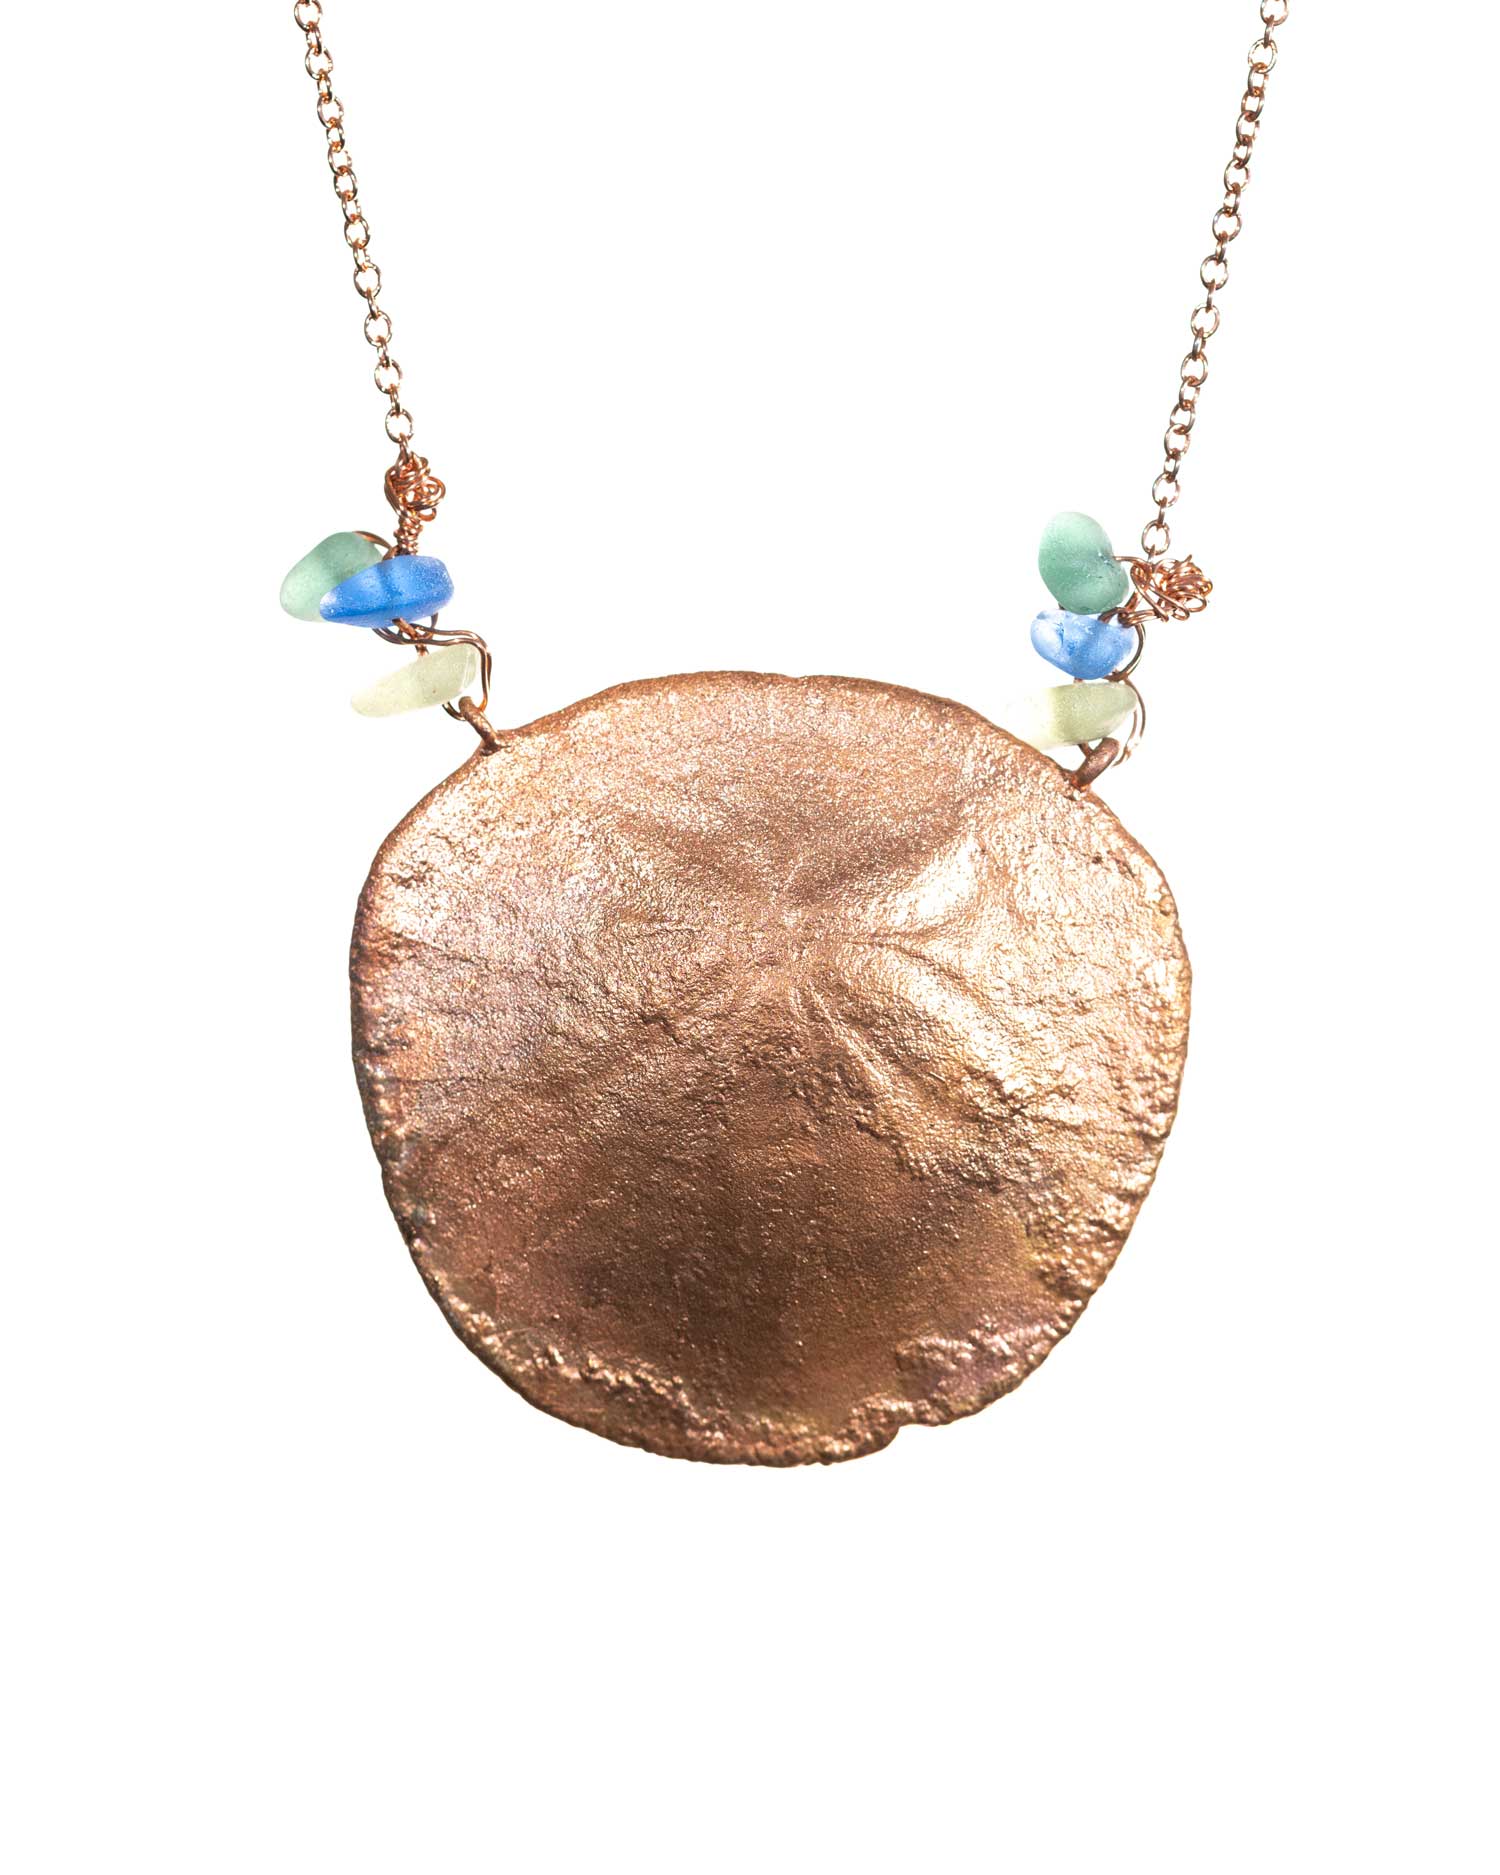 sand dollar necklace with sea glass